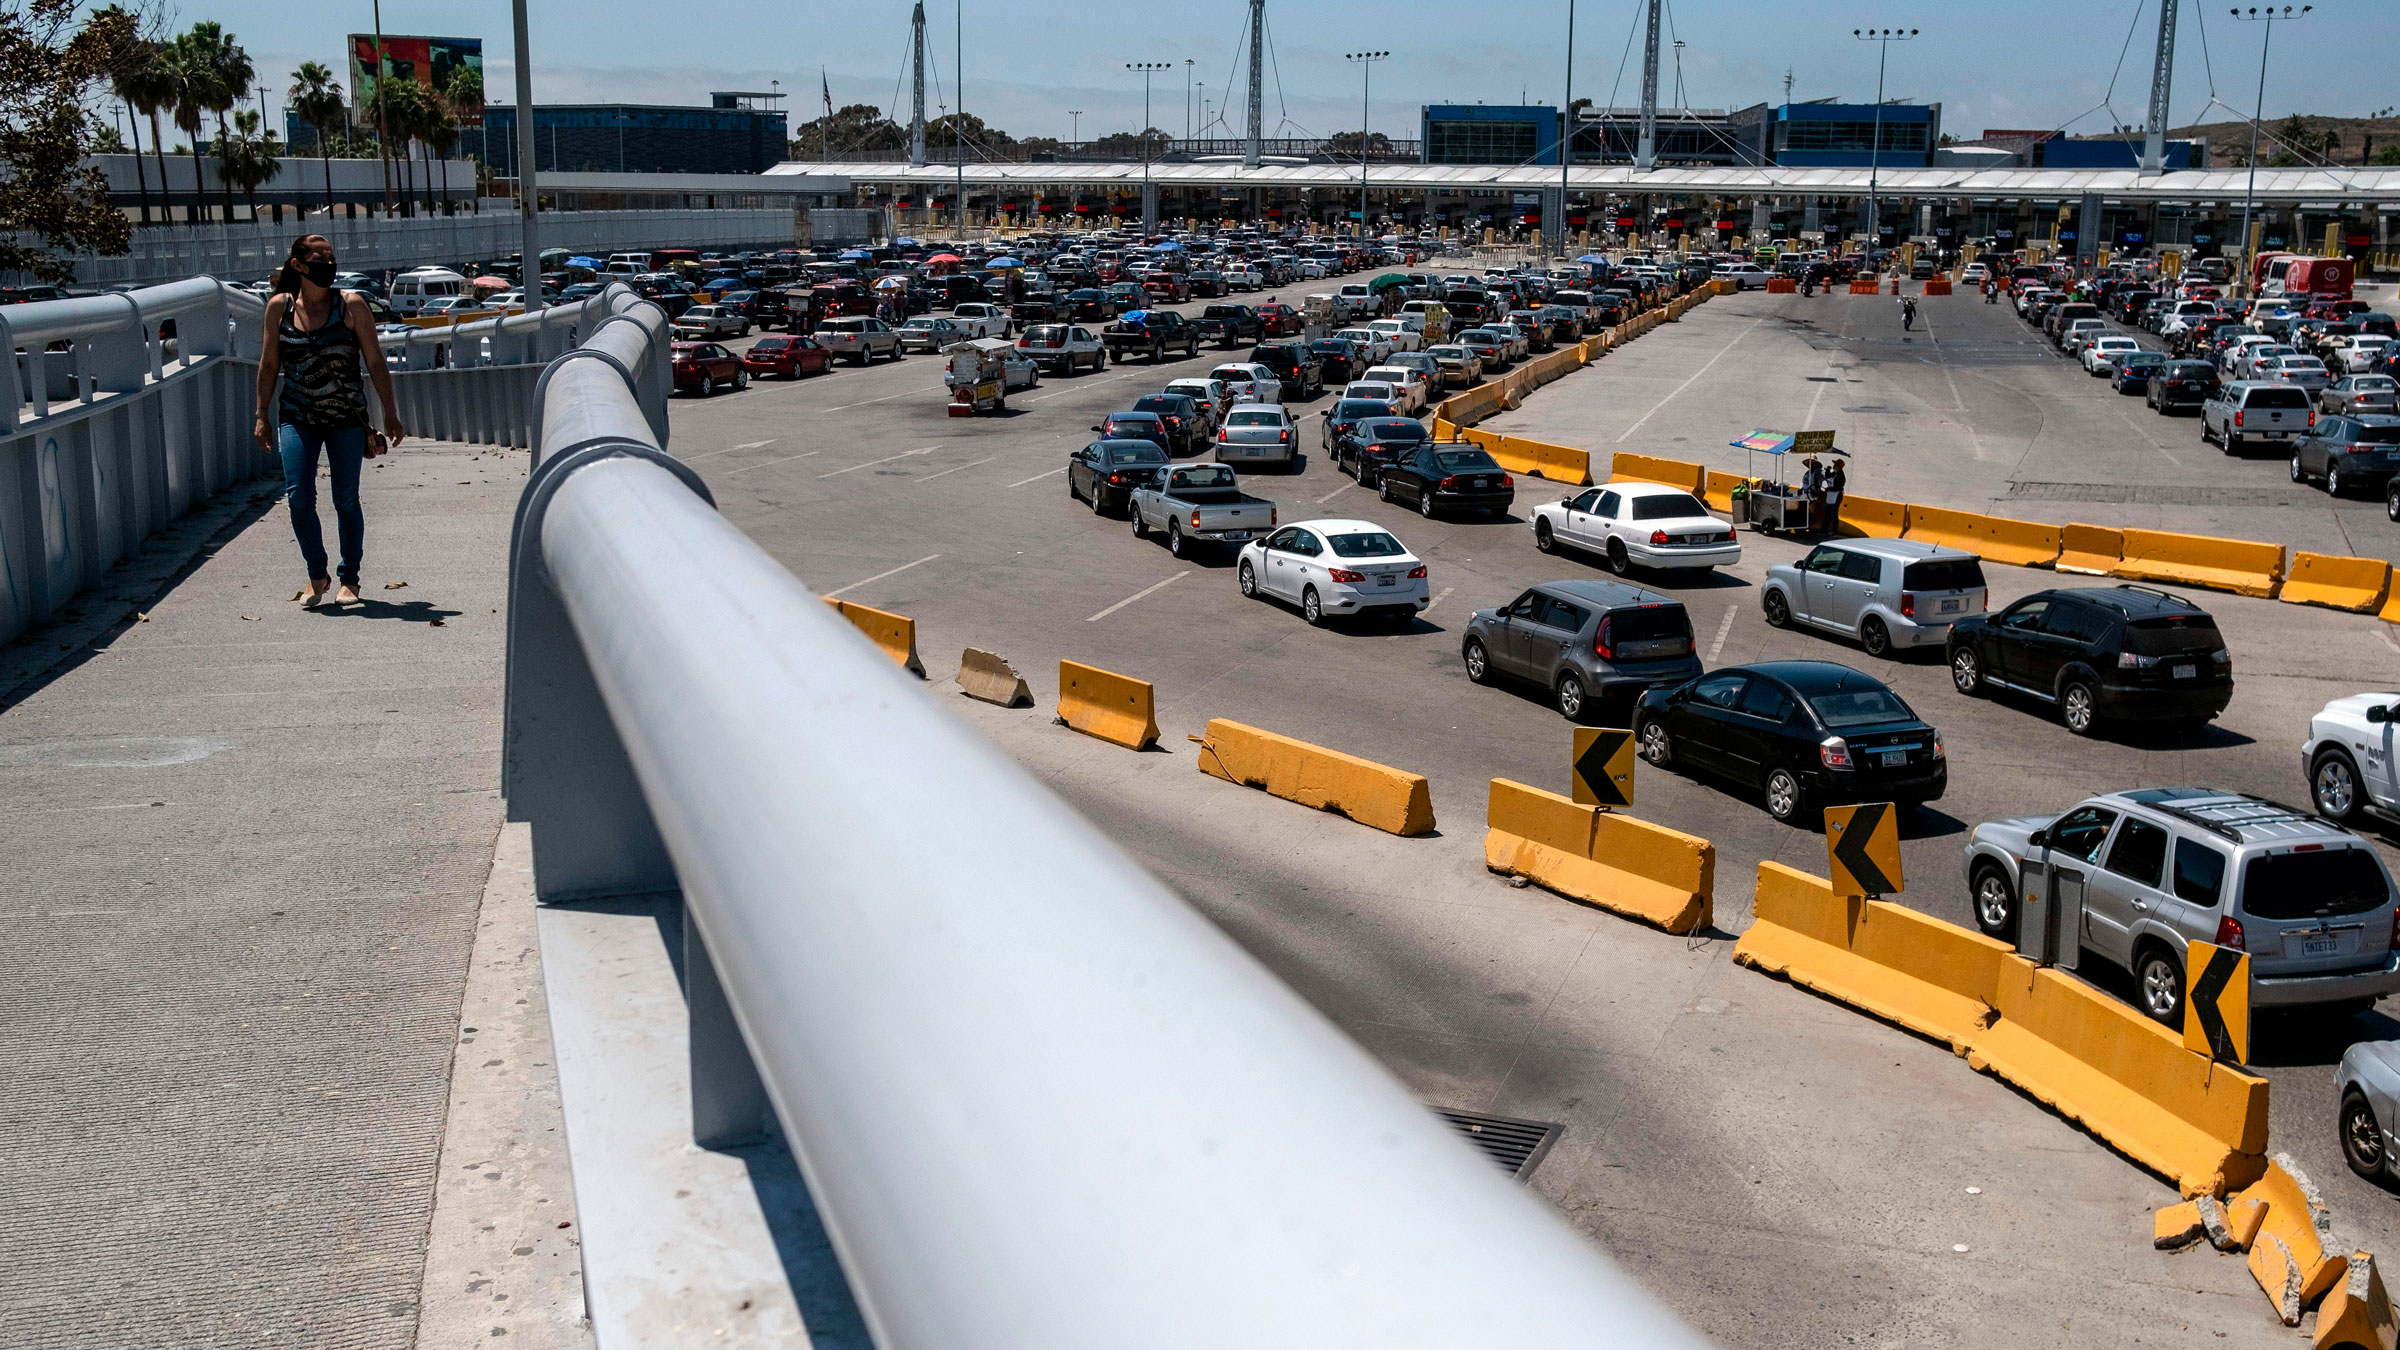 US$8 million to be invested in northern border of Mexico